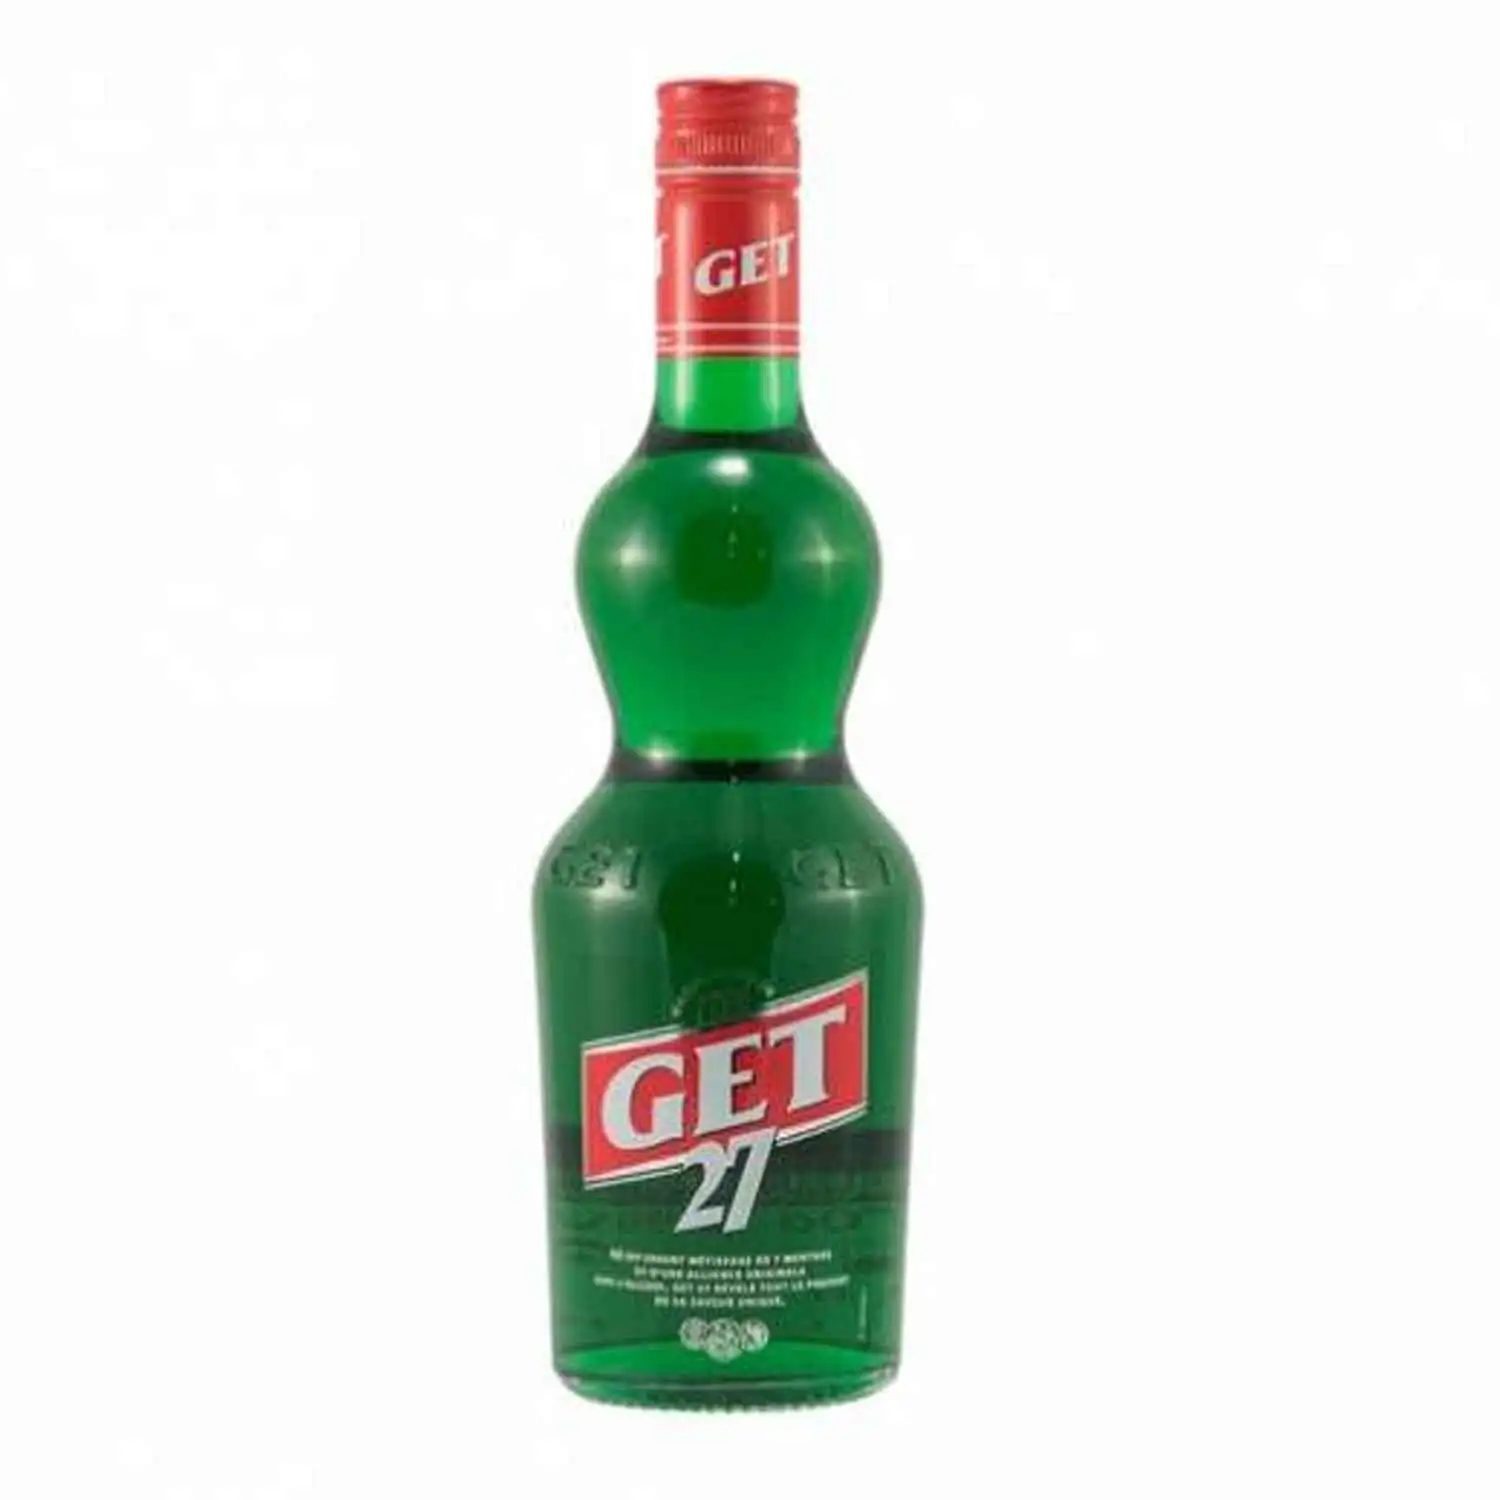 Get 27 70cl Alc 21% - Buy at Real Tobacco